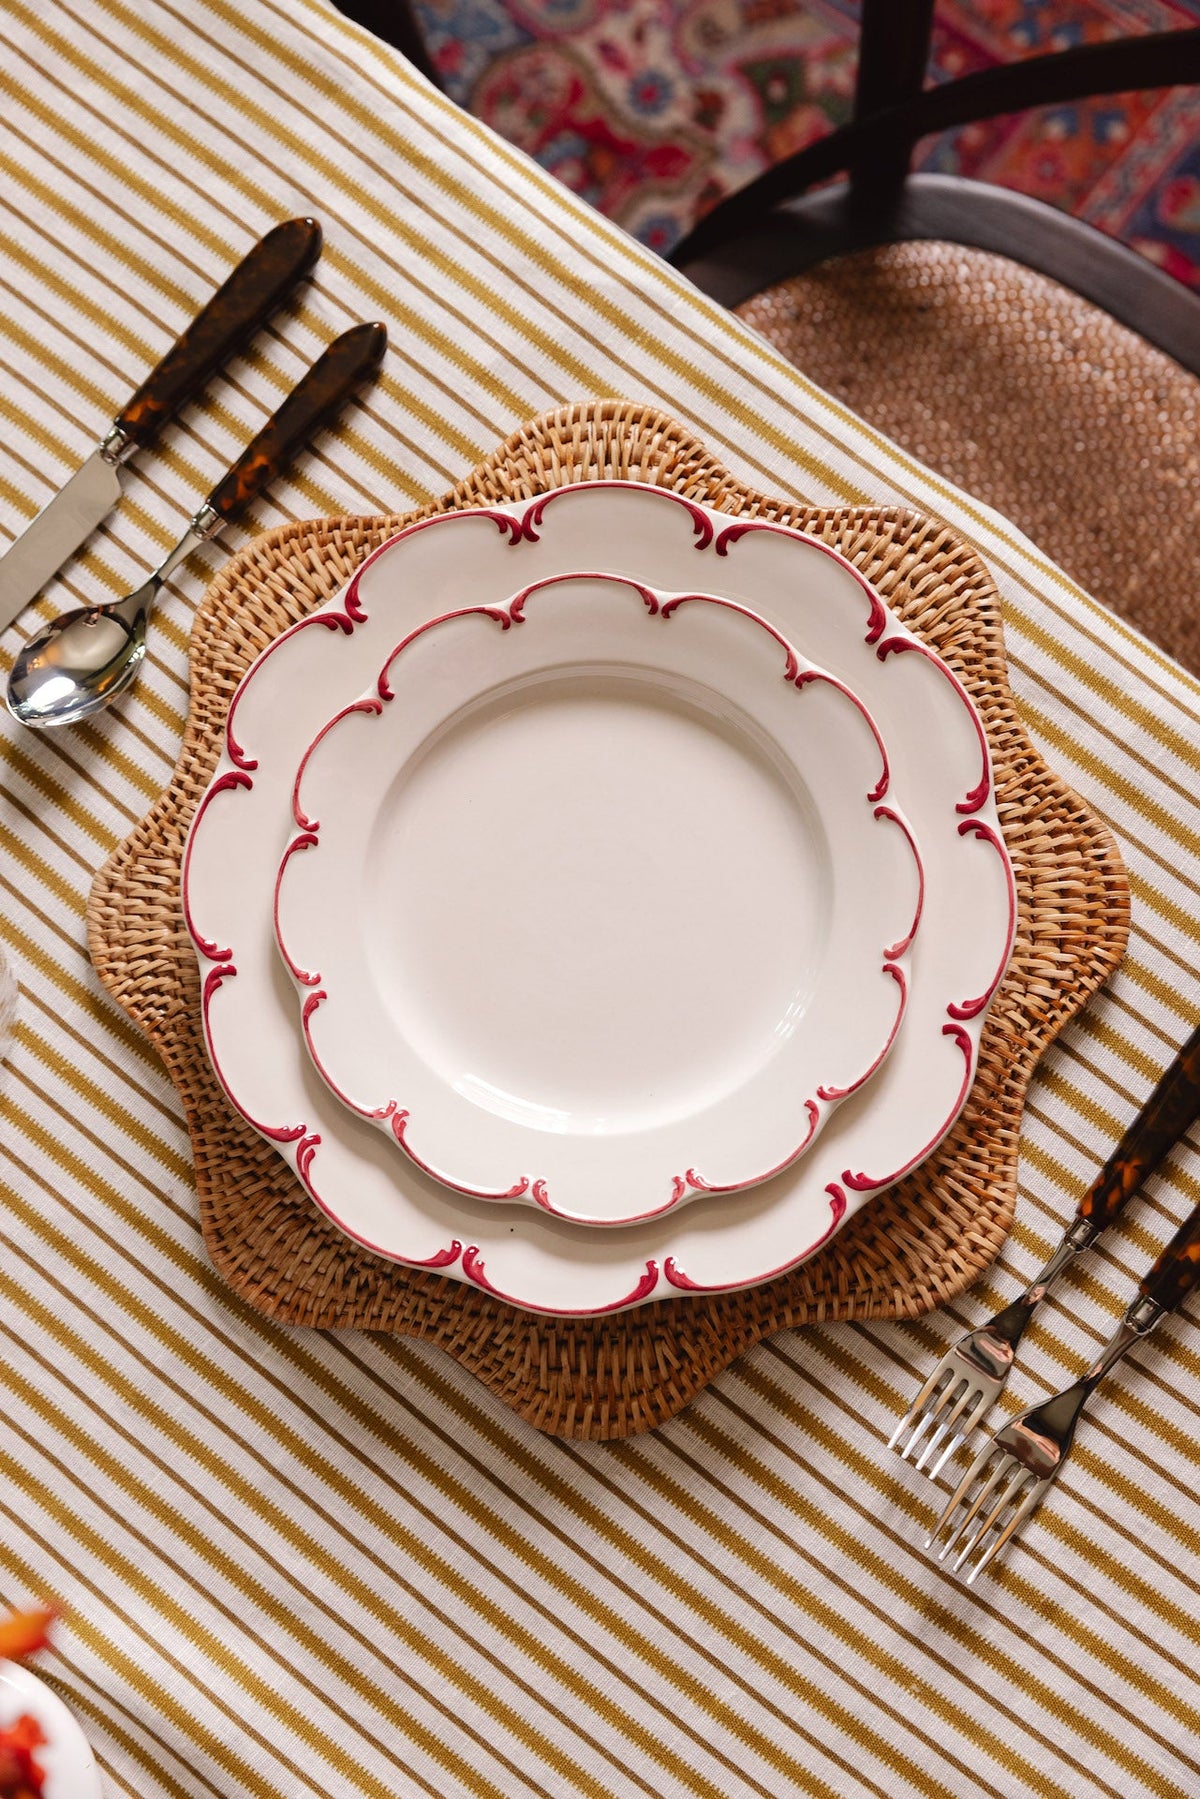 Scalloped Rattan Placemat in Natural